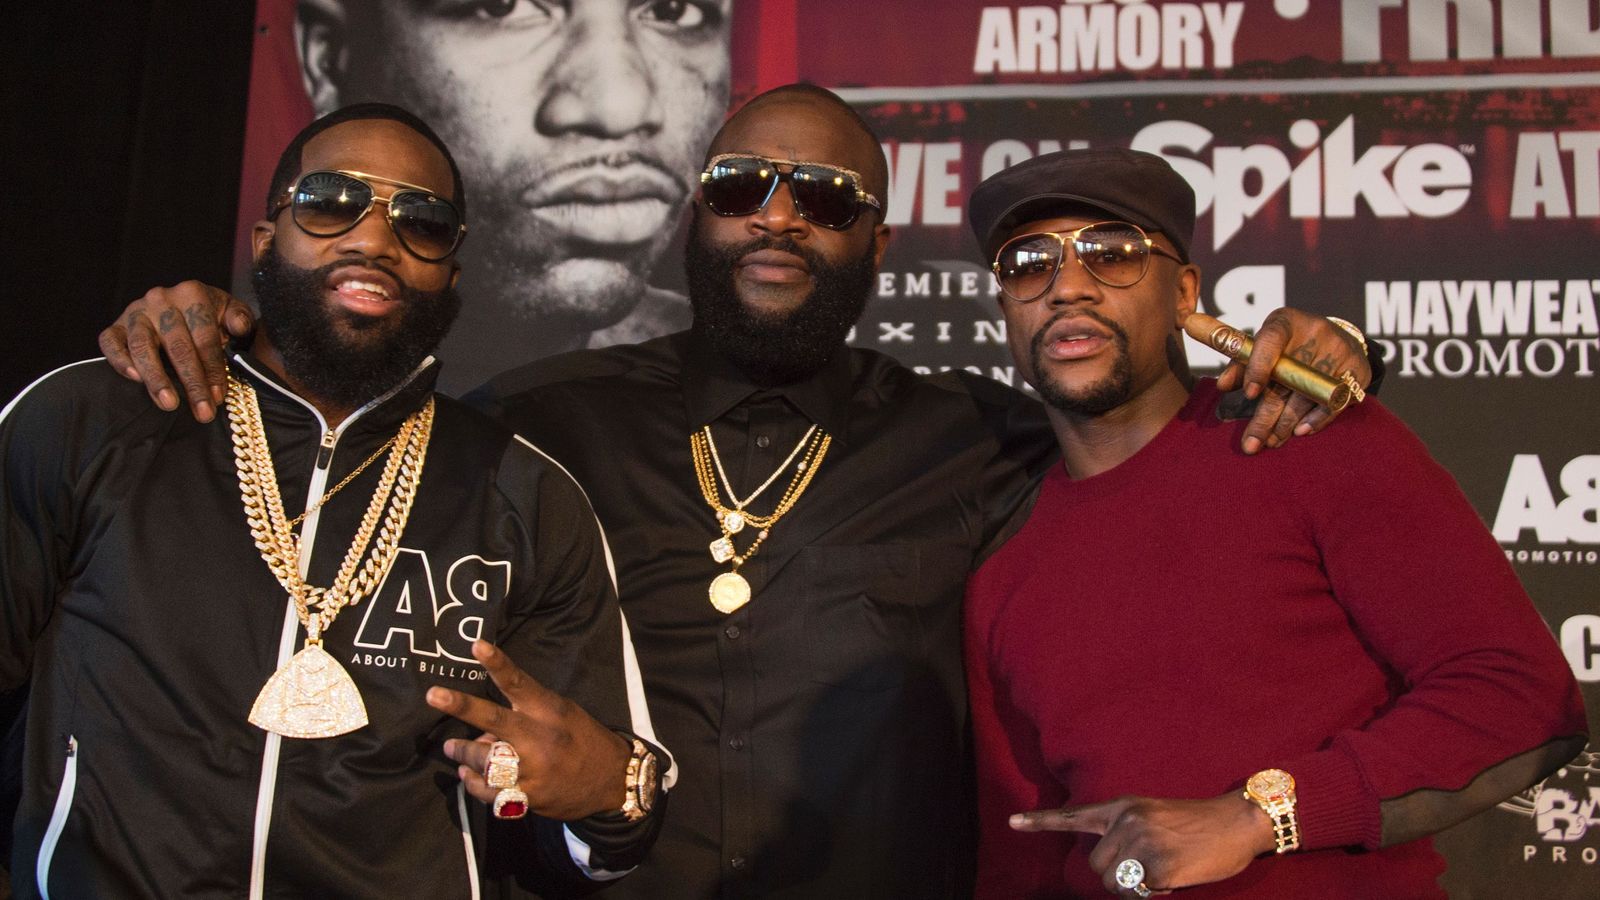 Floyd Mayweather criticises Adrien Broner over latest video | Boxing ...